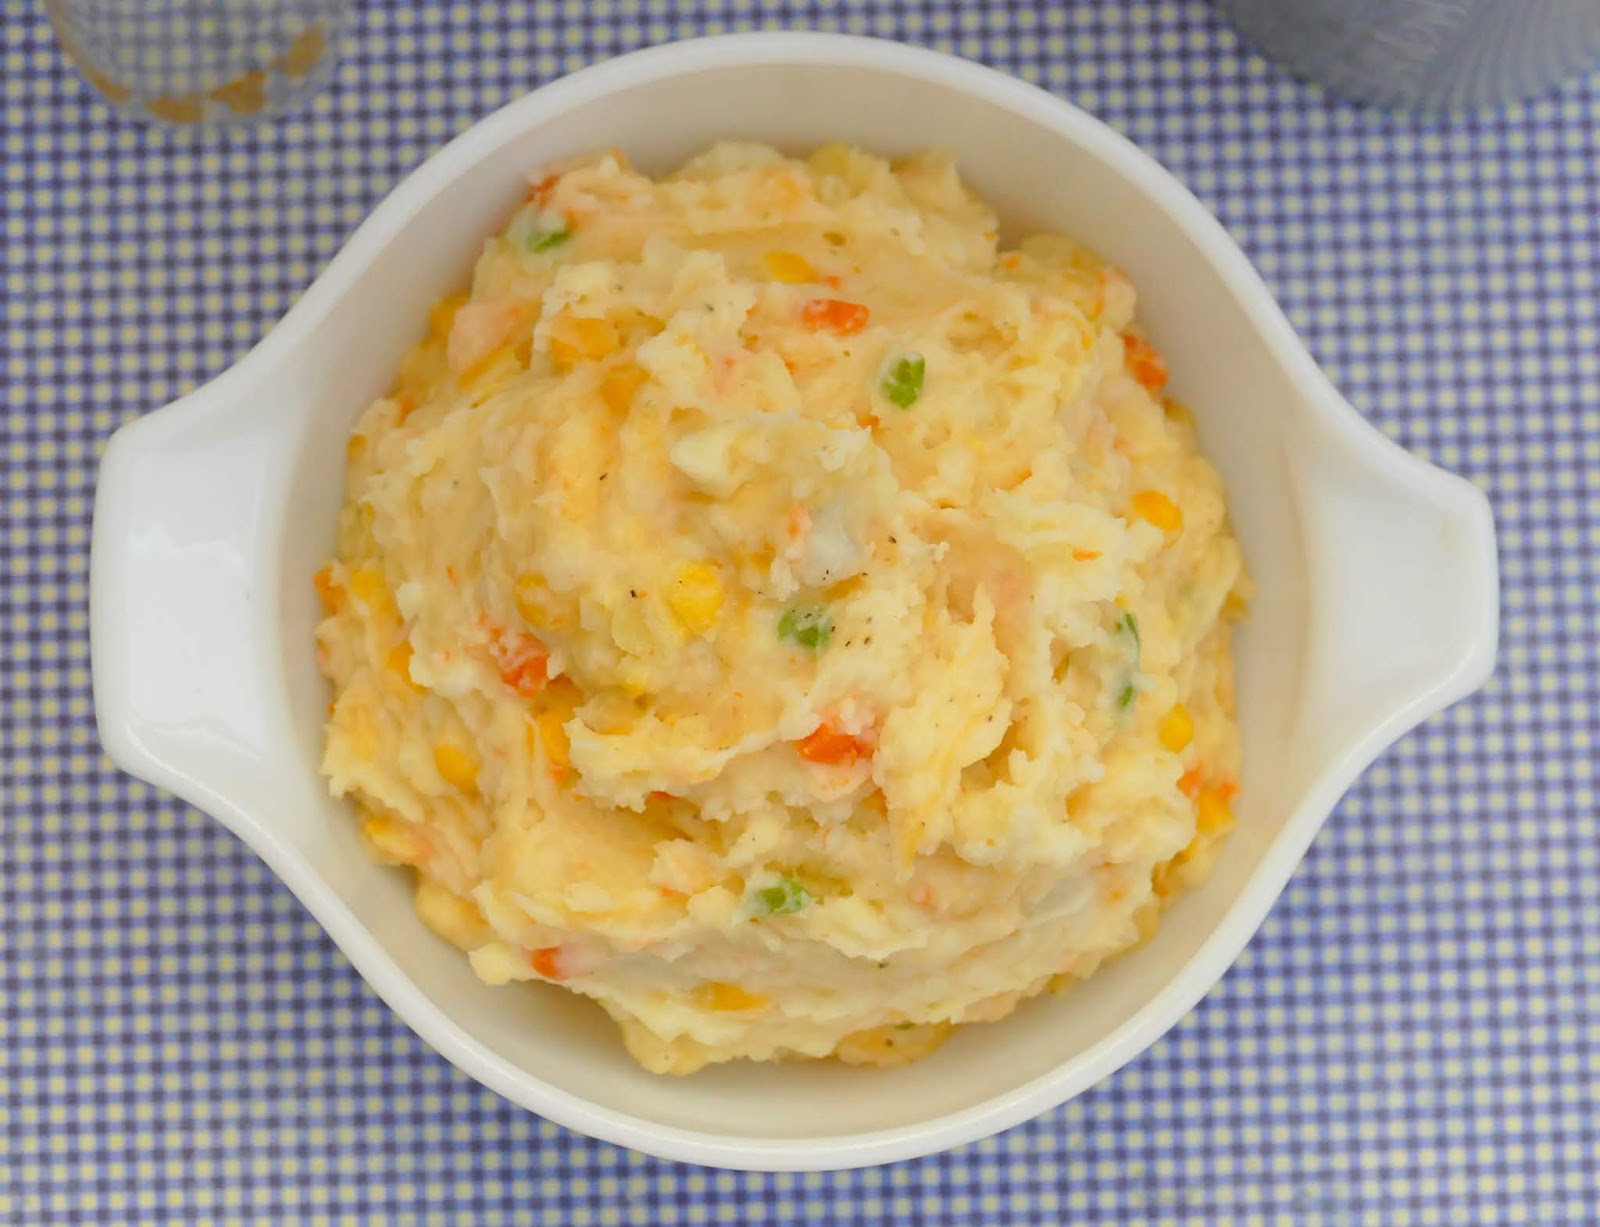 This unique and delicious side dish is perfect for weeknights, Sunday dinner, Thanksgiving, Christmas or Easter! The mixture of veggies and cheese inside the mashed potatoes makes it so flavorful. Total comfort food!